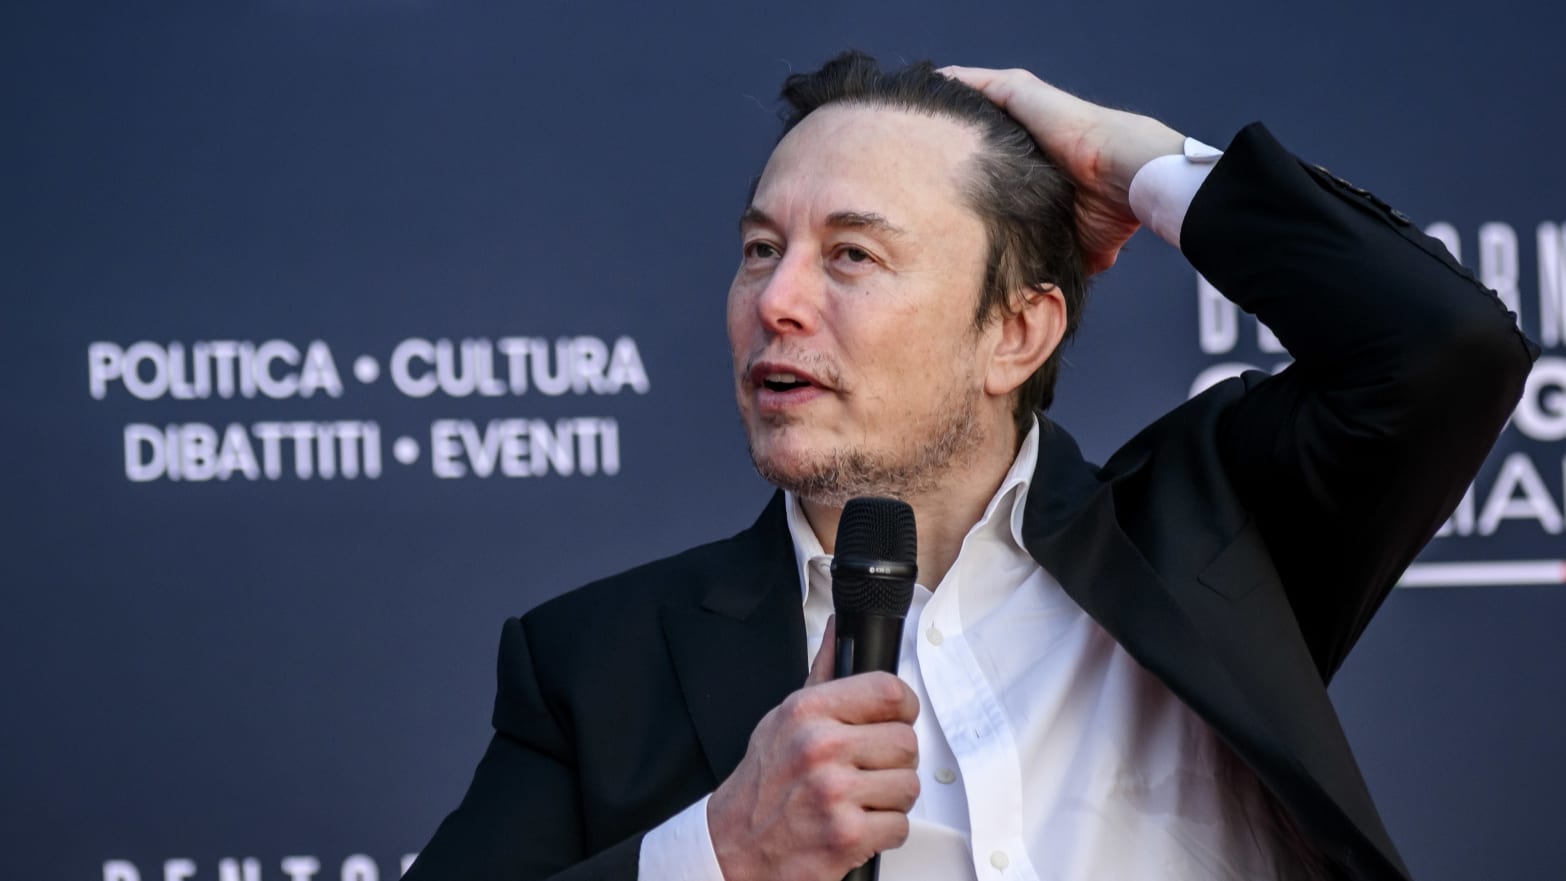 Elon Musk speaks at a conference in Italy.